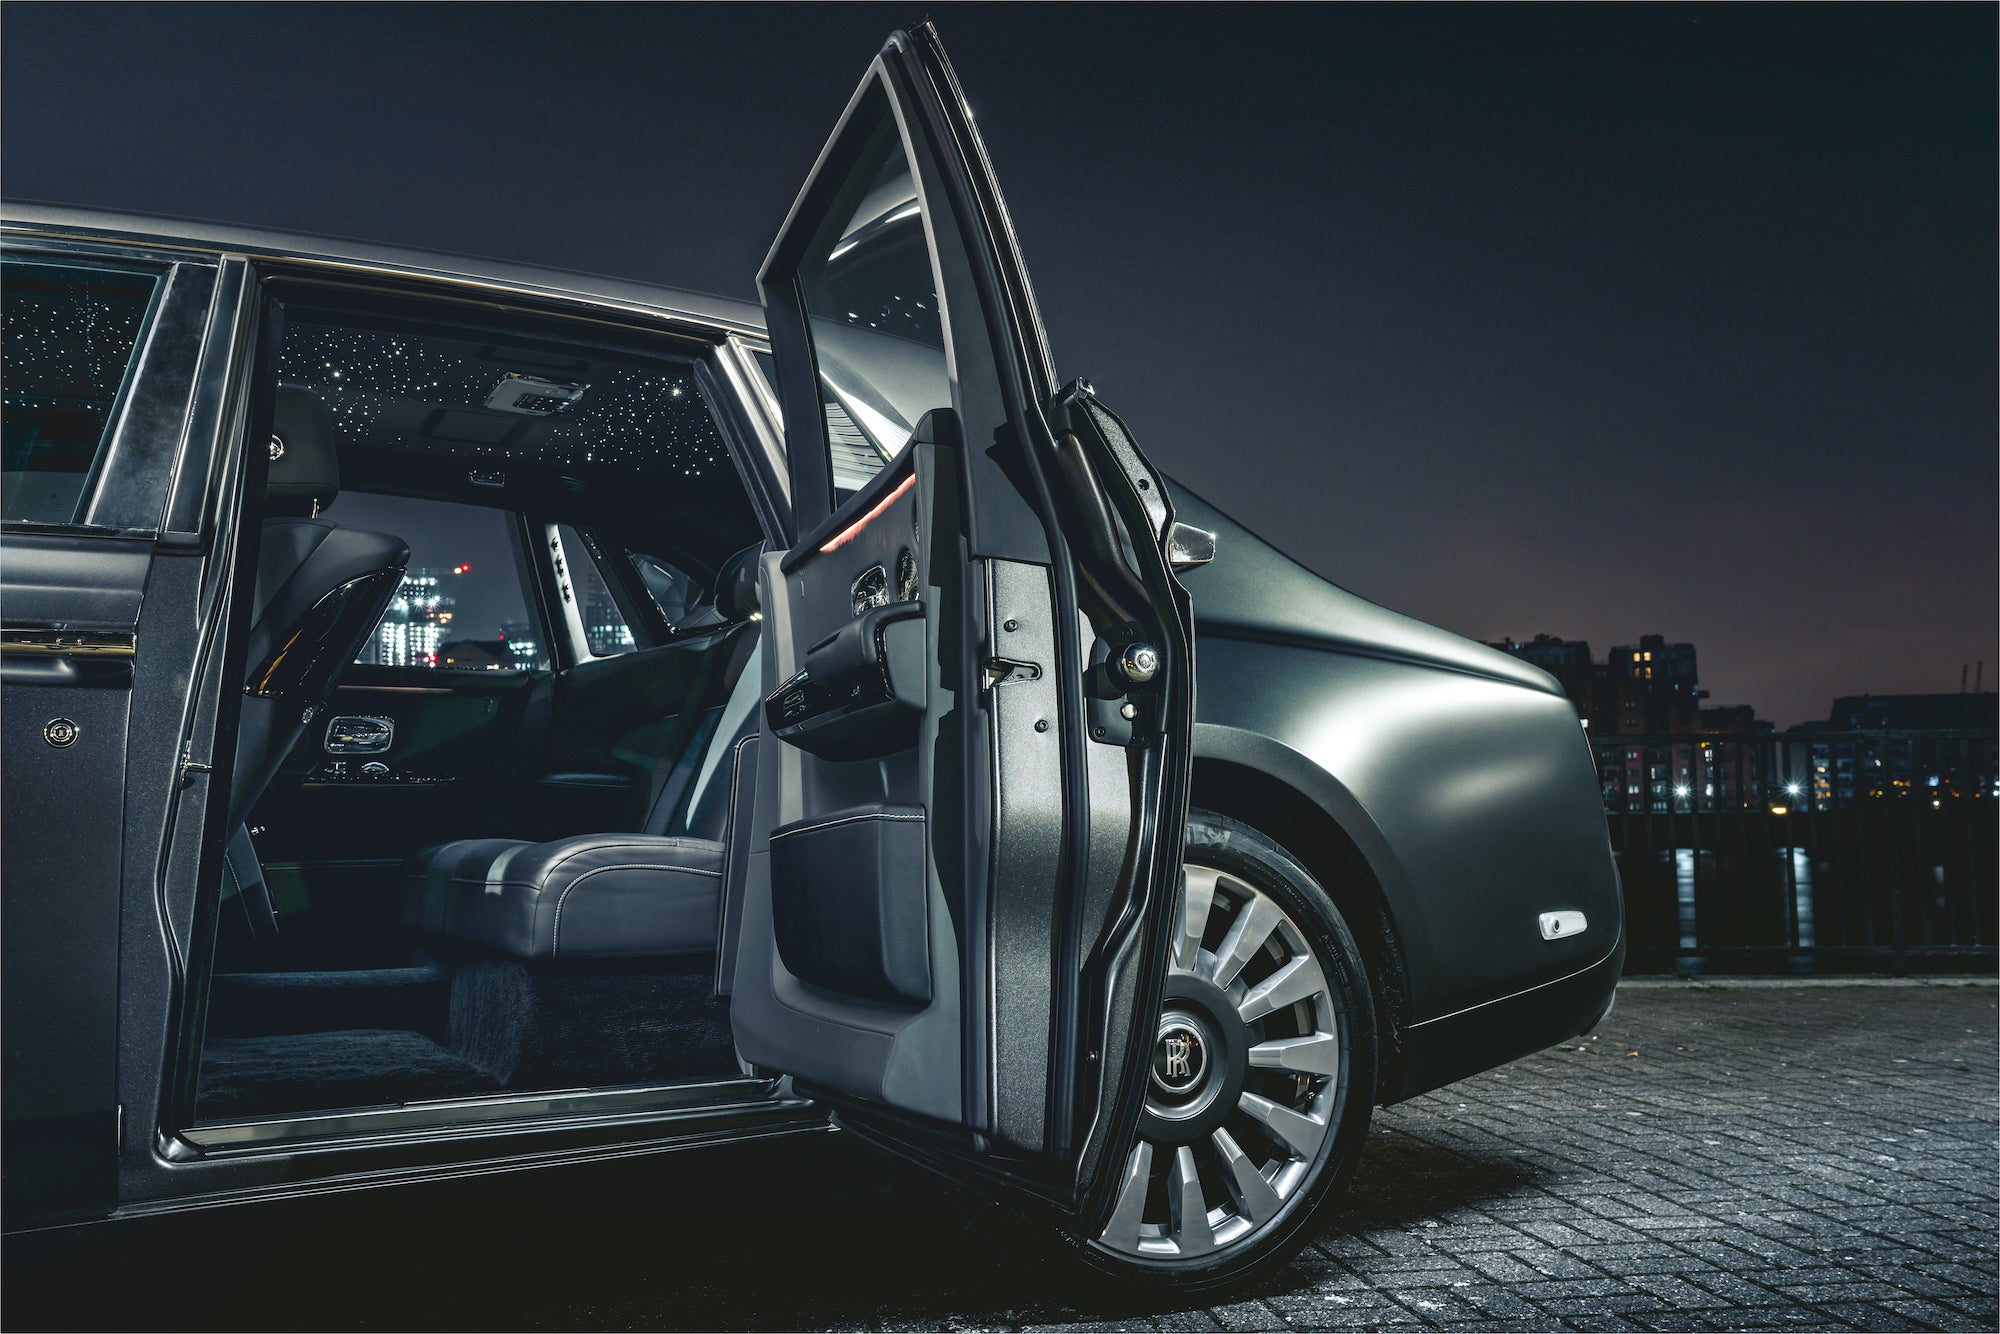 See How The Starlight Headliner Became A Bespoke Request In RollsRoyce  Cars  AUTOJOSH